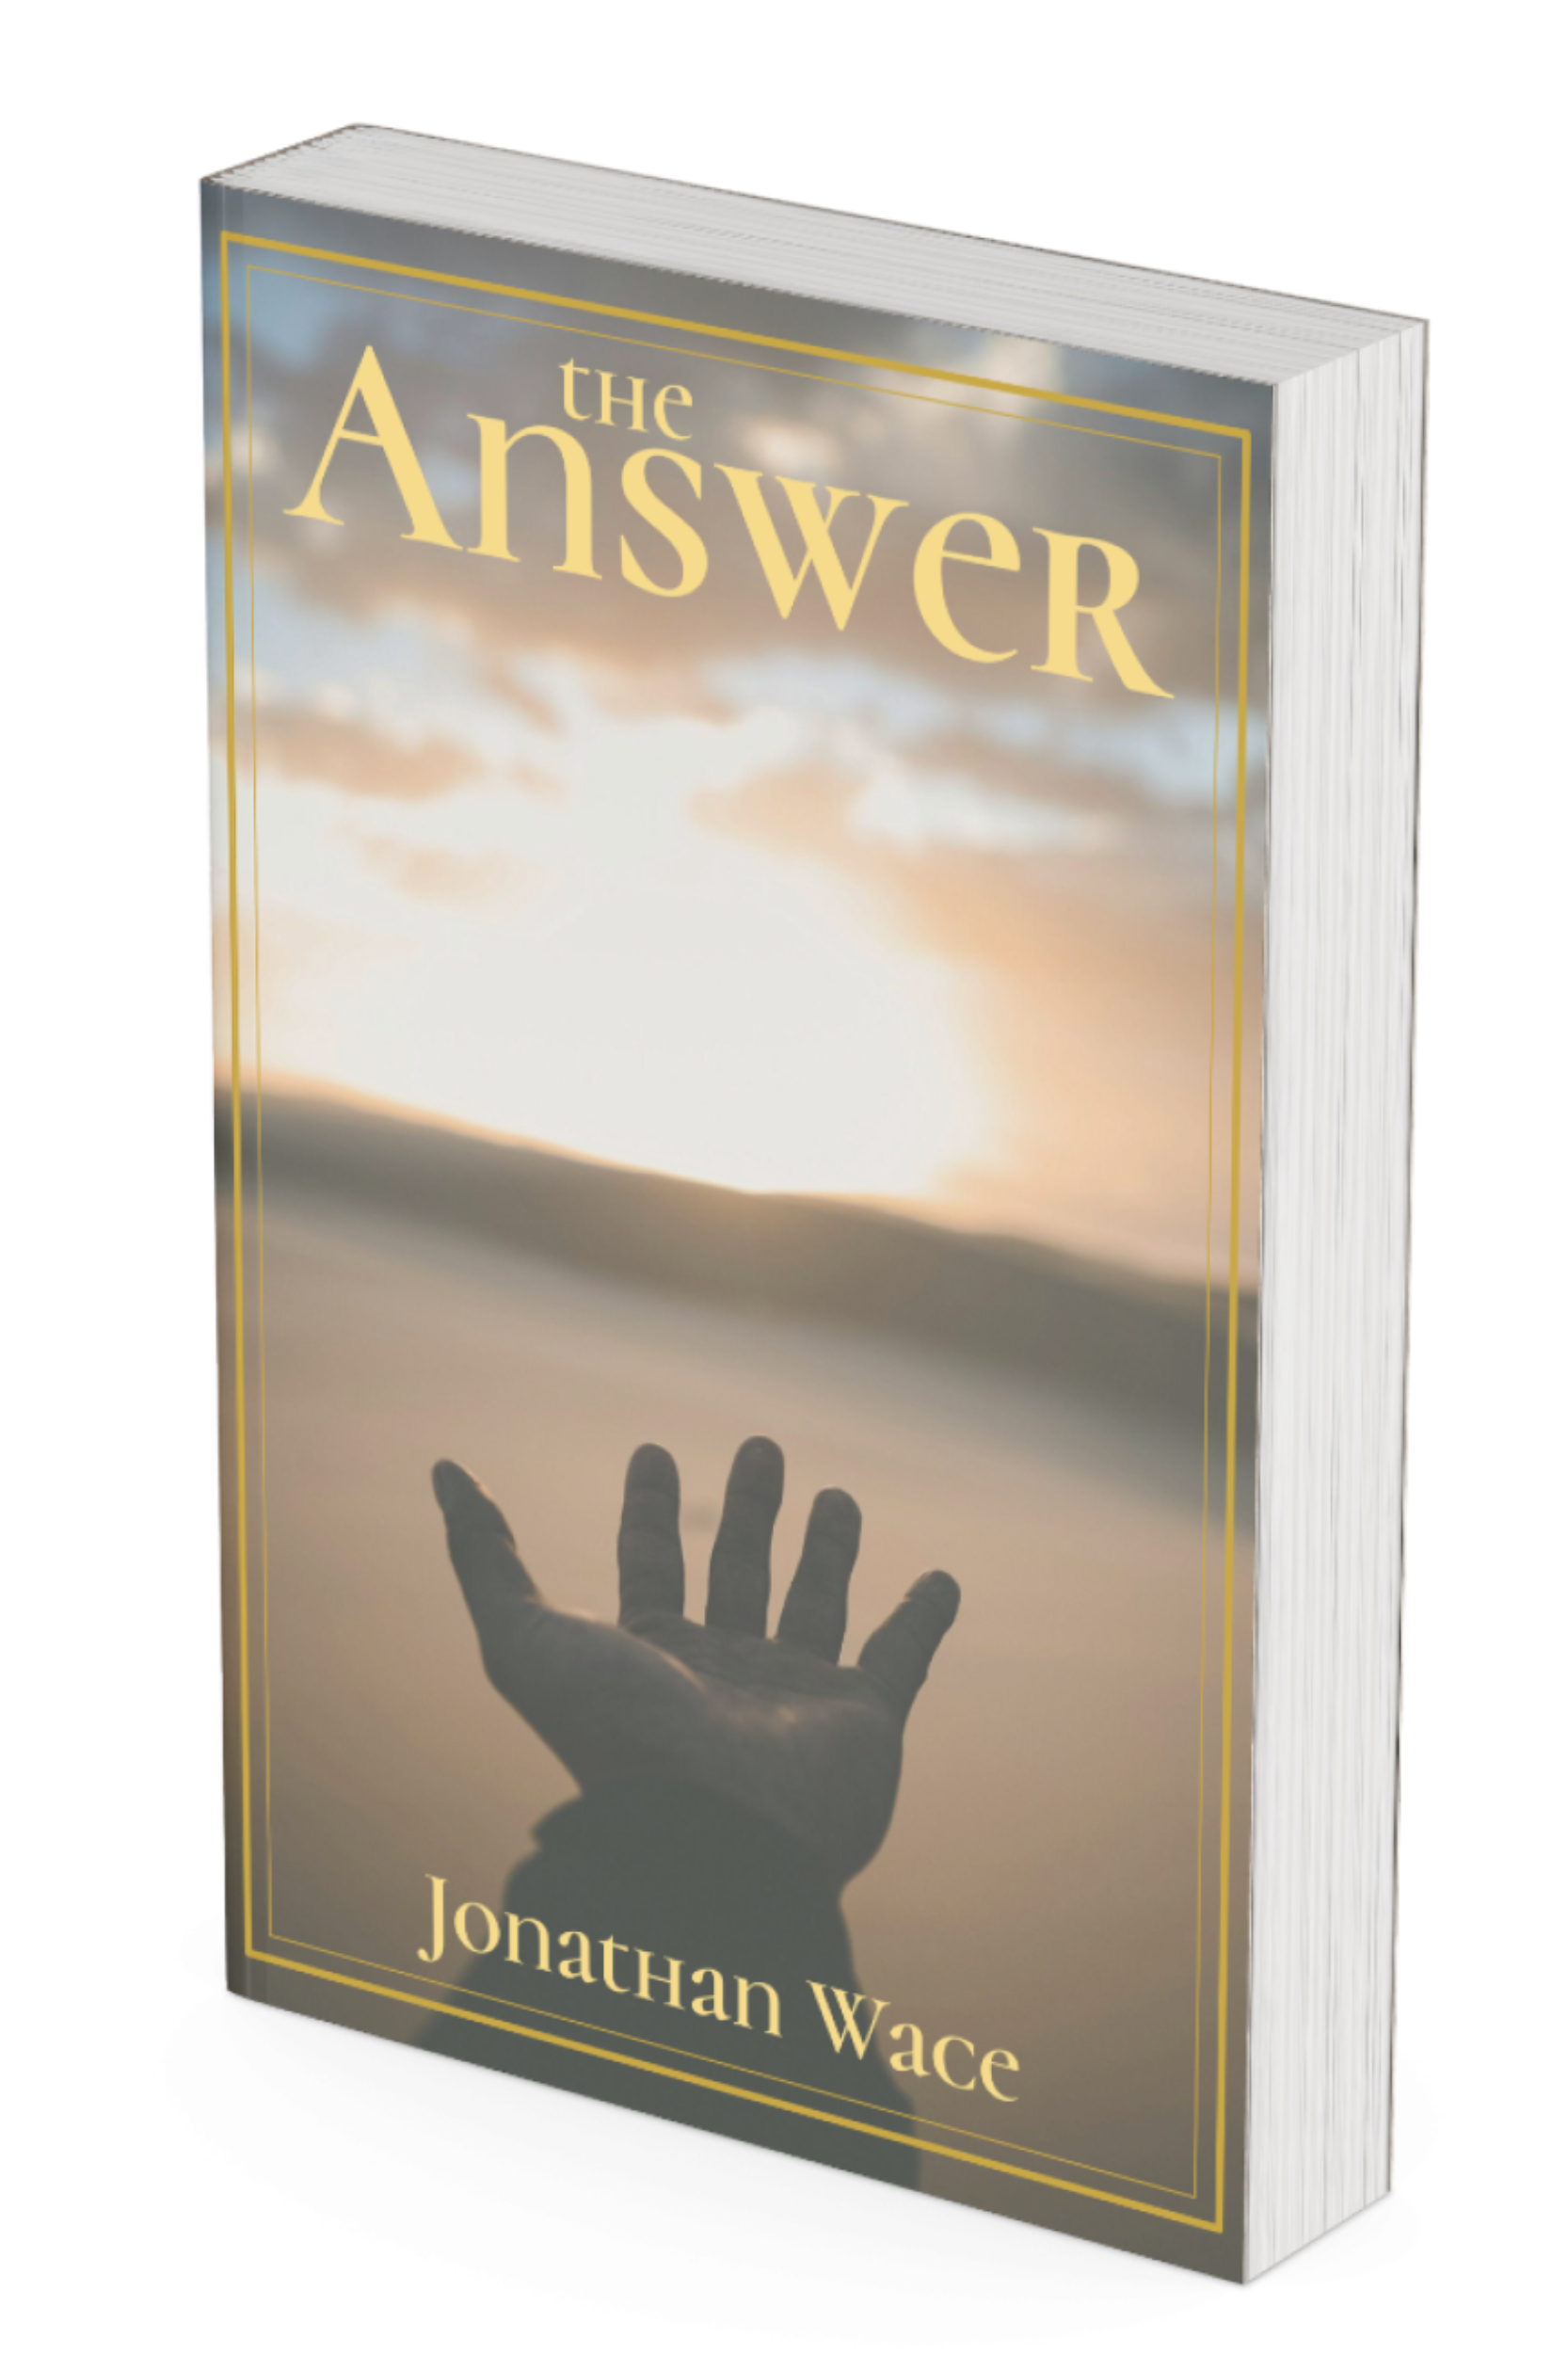 The book 'The Answer' by Jonathan Wace